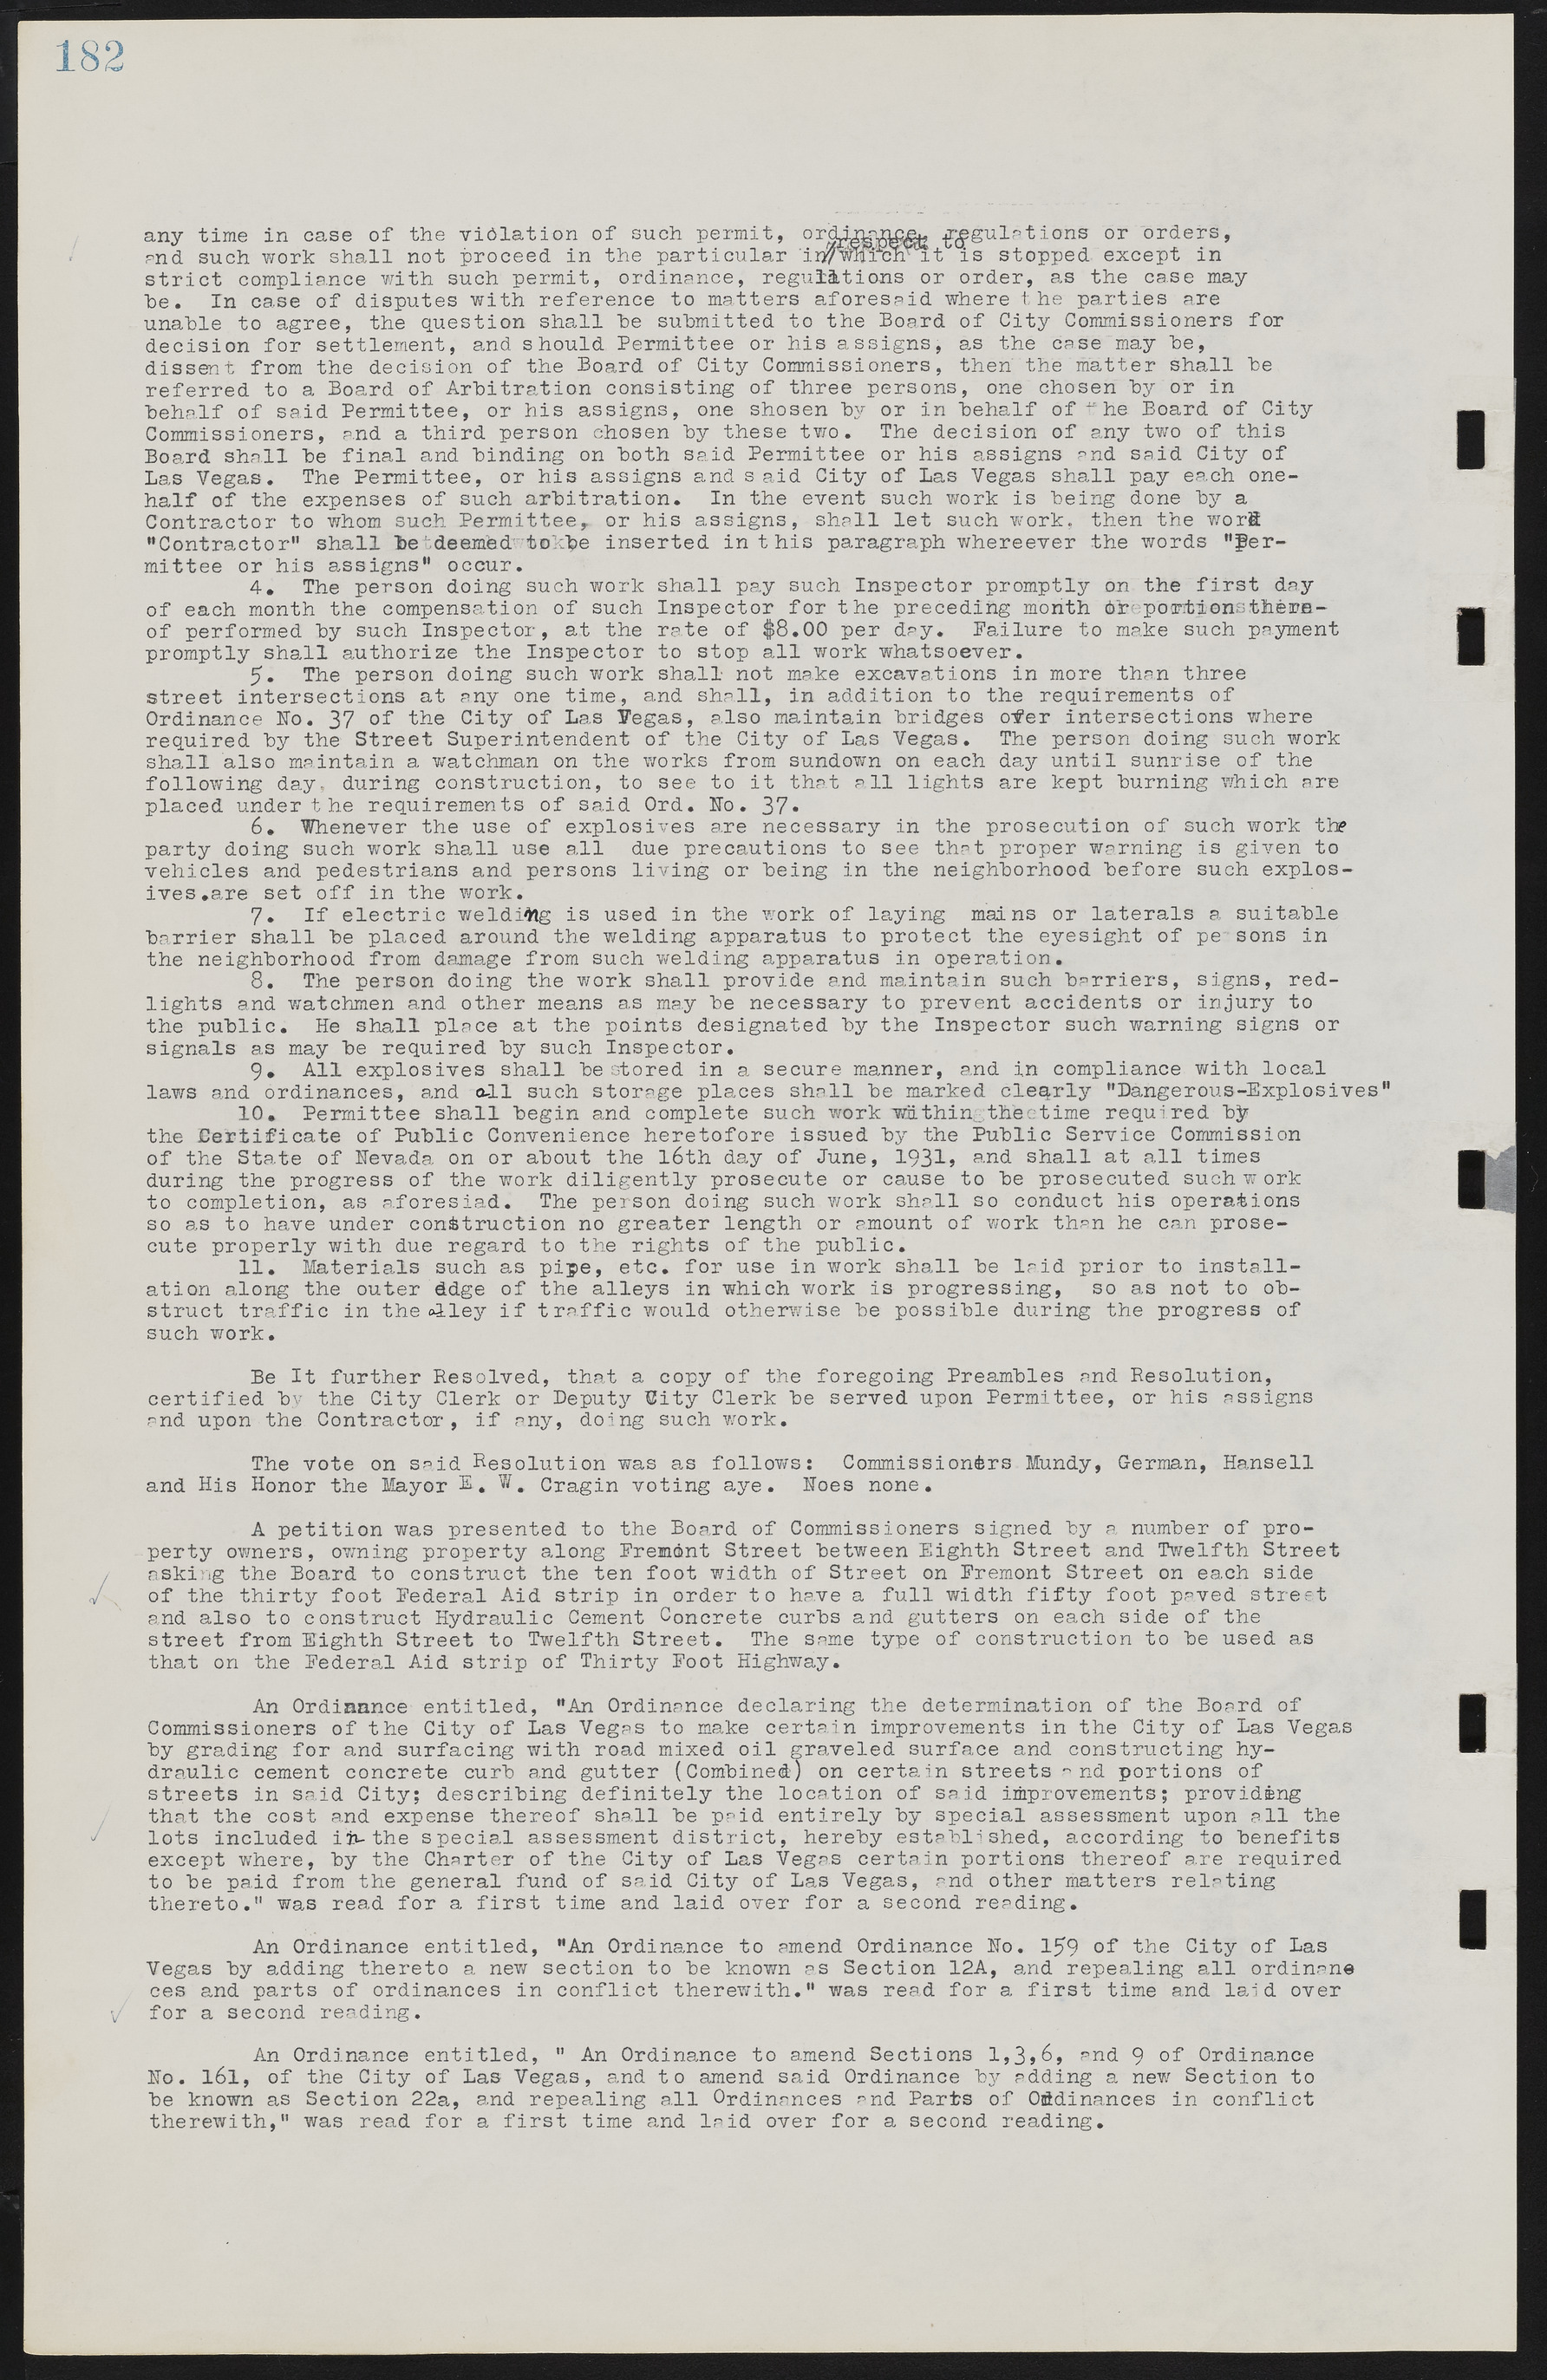 Las Vegas City Commission Minutes, May 14, 1929 to February 11, 1937, lvc000003-188